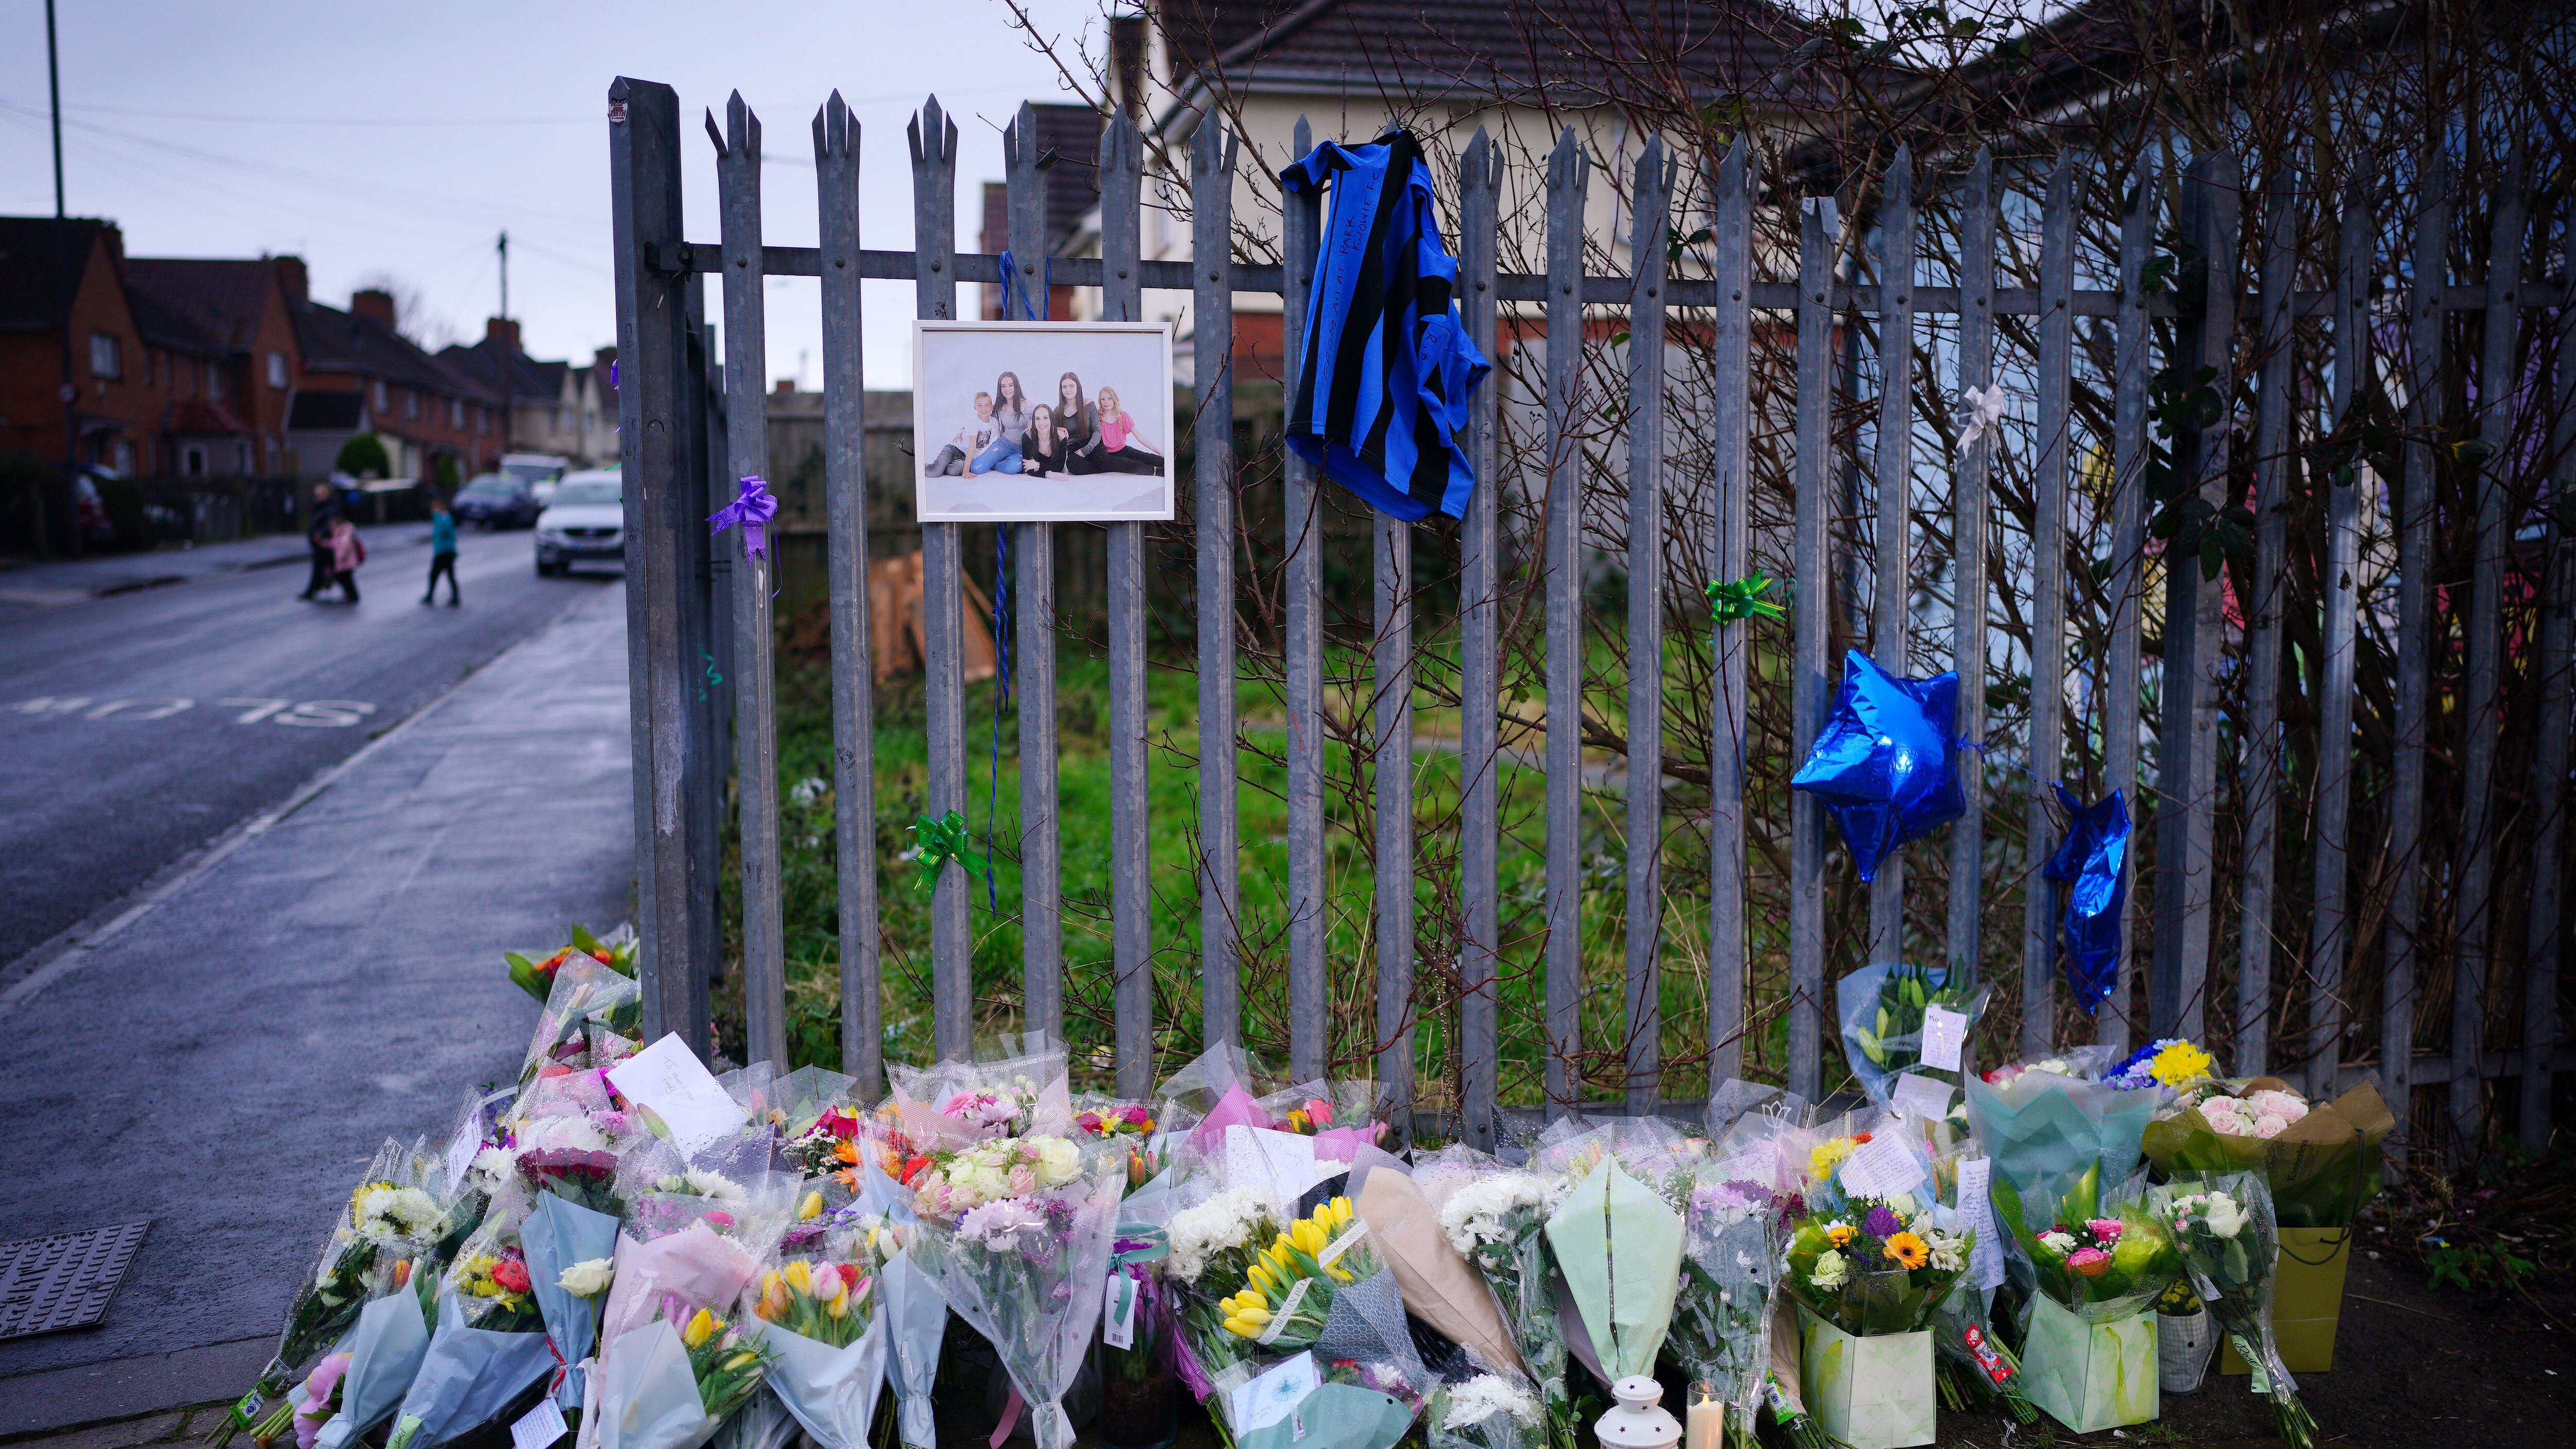 Floral tributes have been laid near the scene